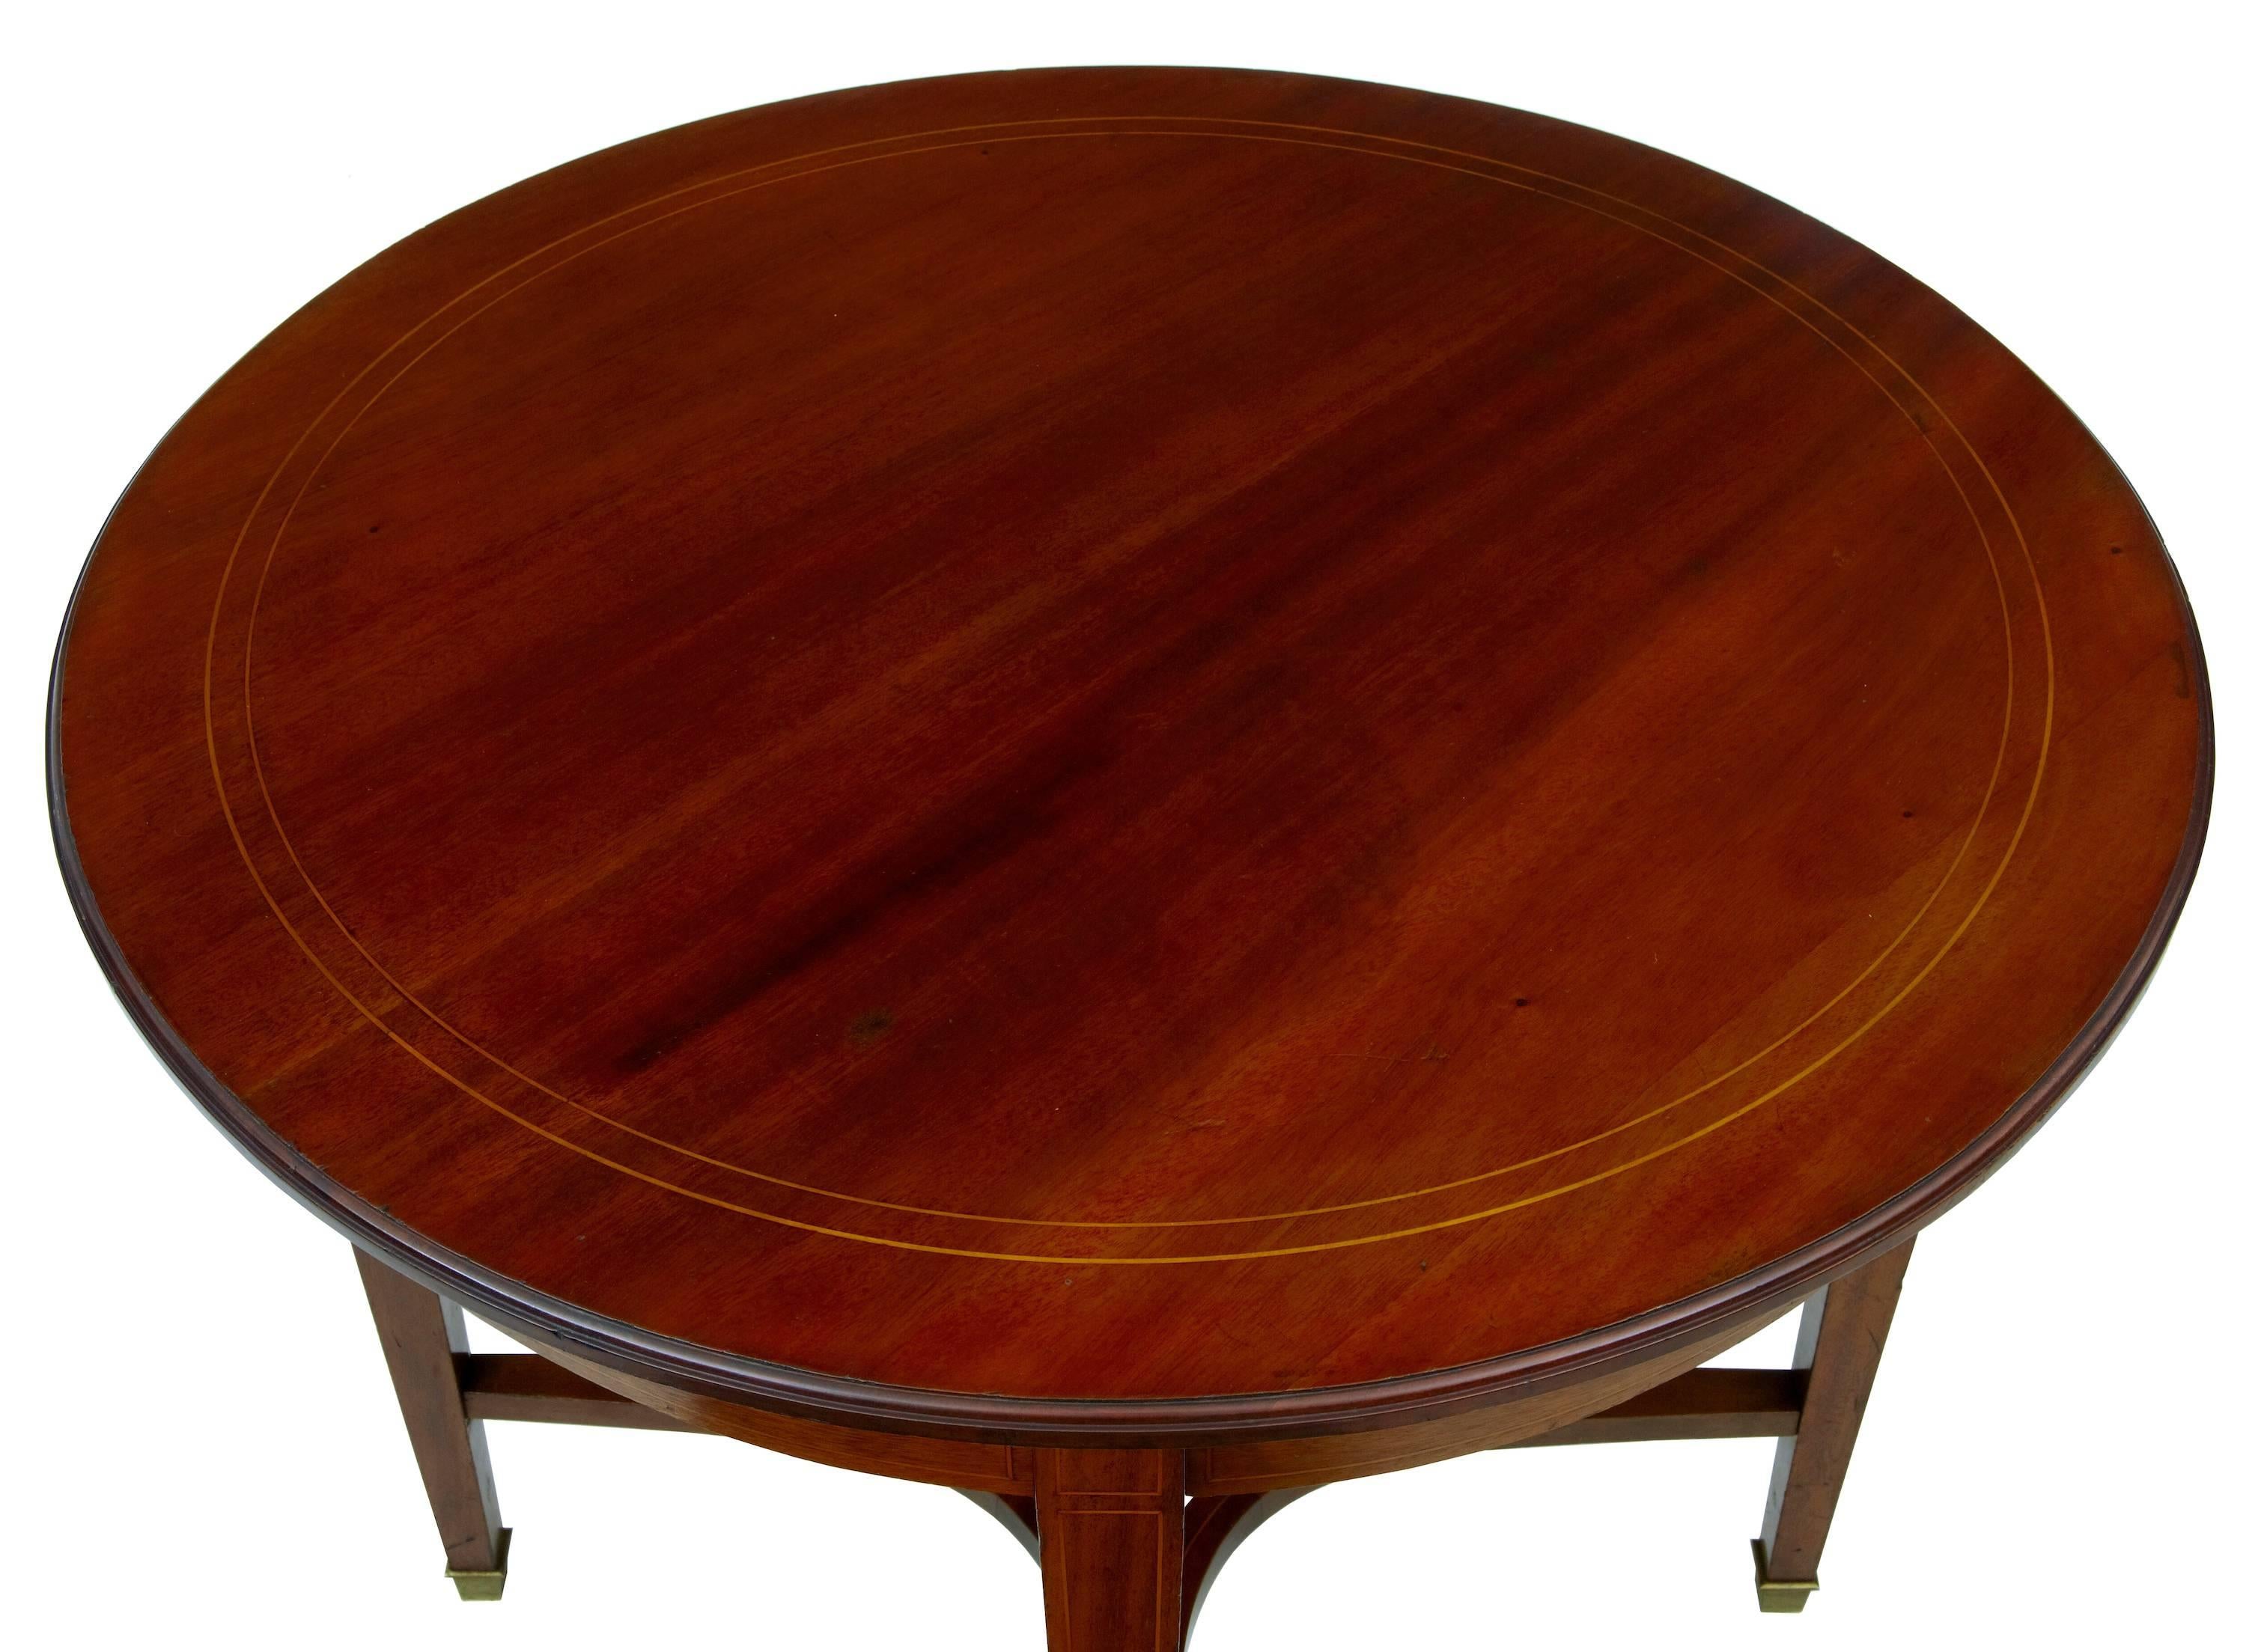 Mahogany round center table with satinwood stringing.

Some surface marks to top.

Measures: Height 27 1/3